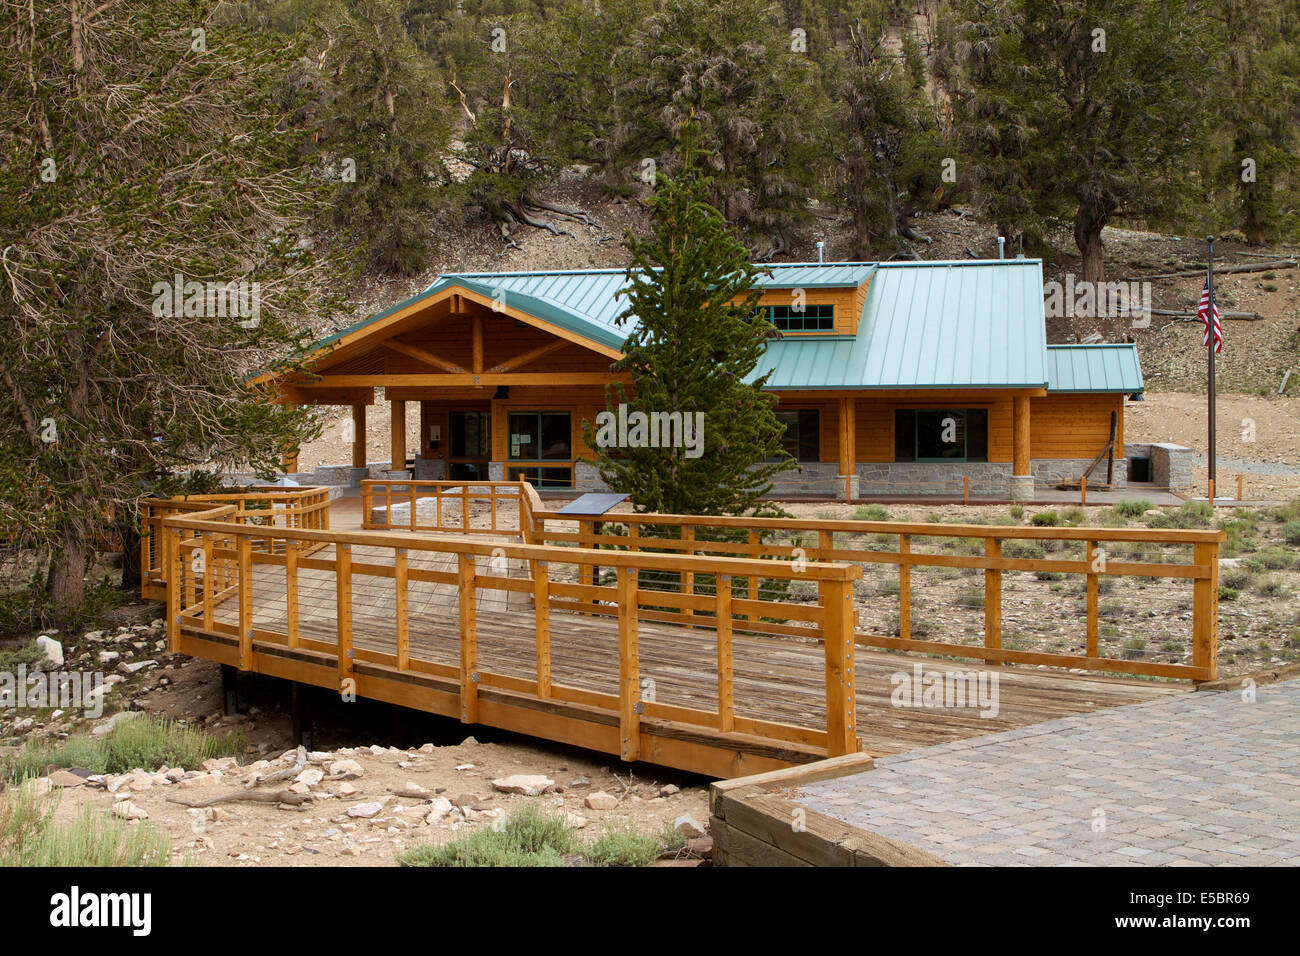 The schulman grove Ancient Bristlecone Pine Forest Visitor Center in the Inyo National forest California Stock Photo